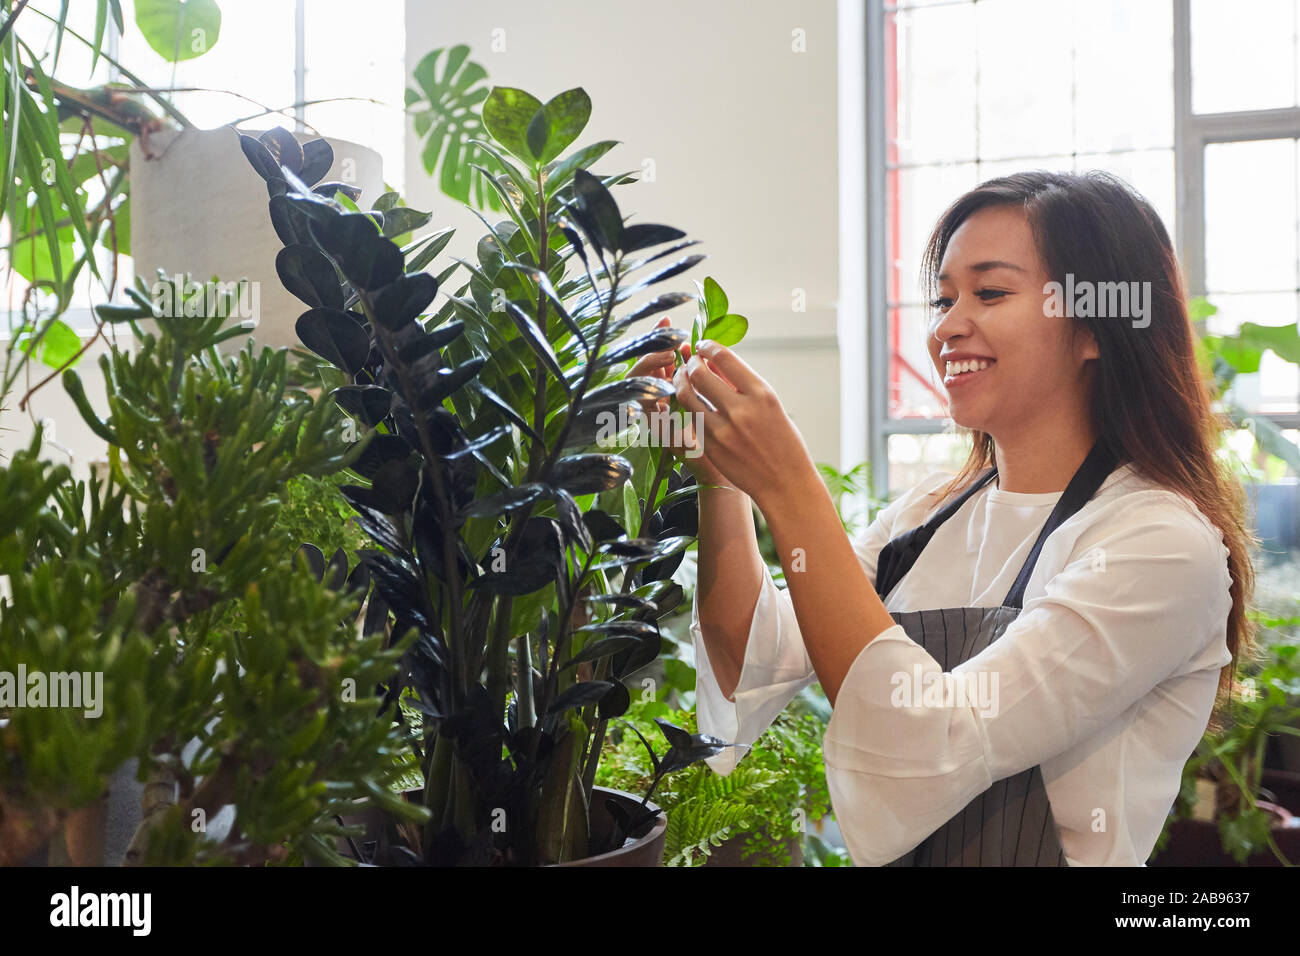 Young florist inspects quality and growth of green plant Stock Photo